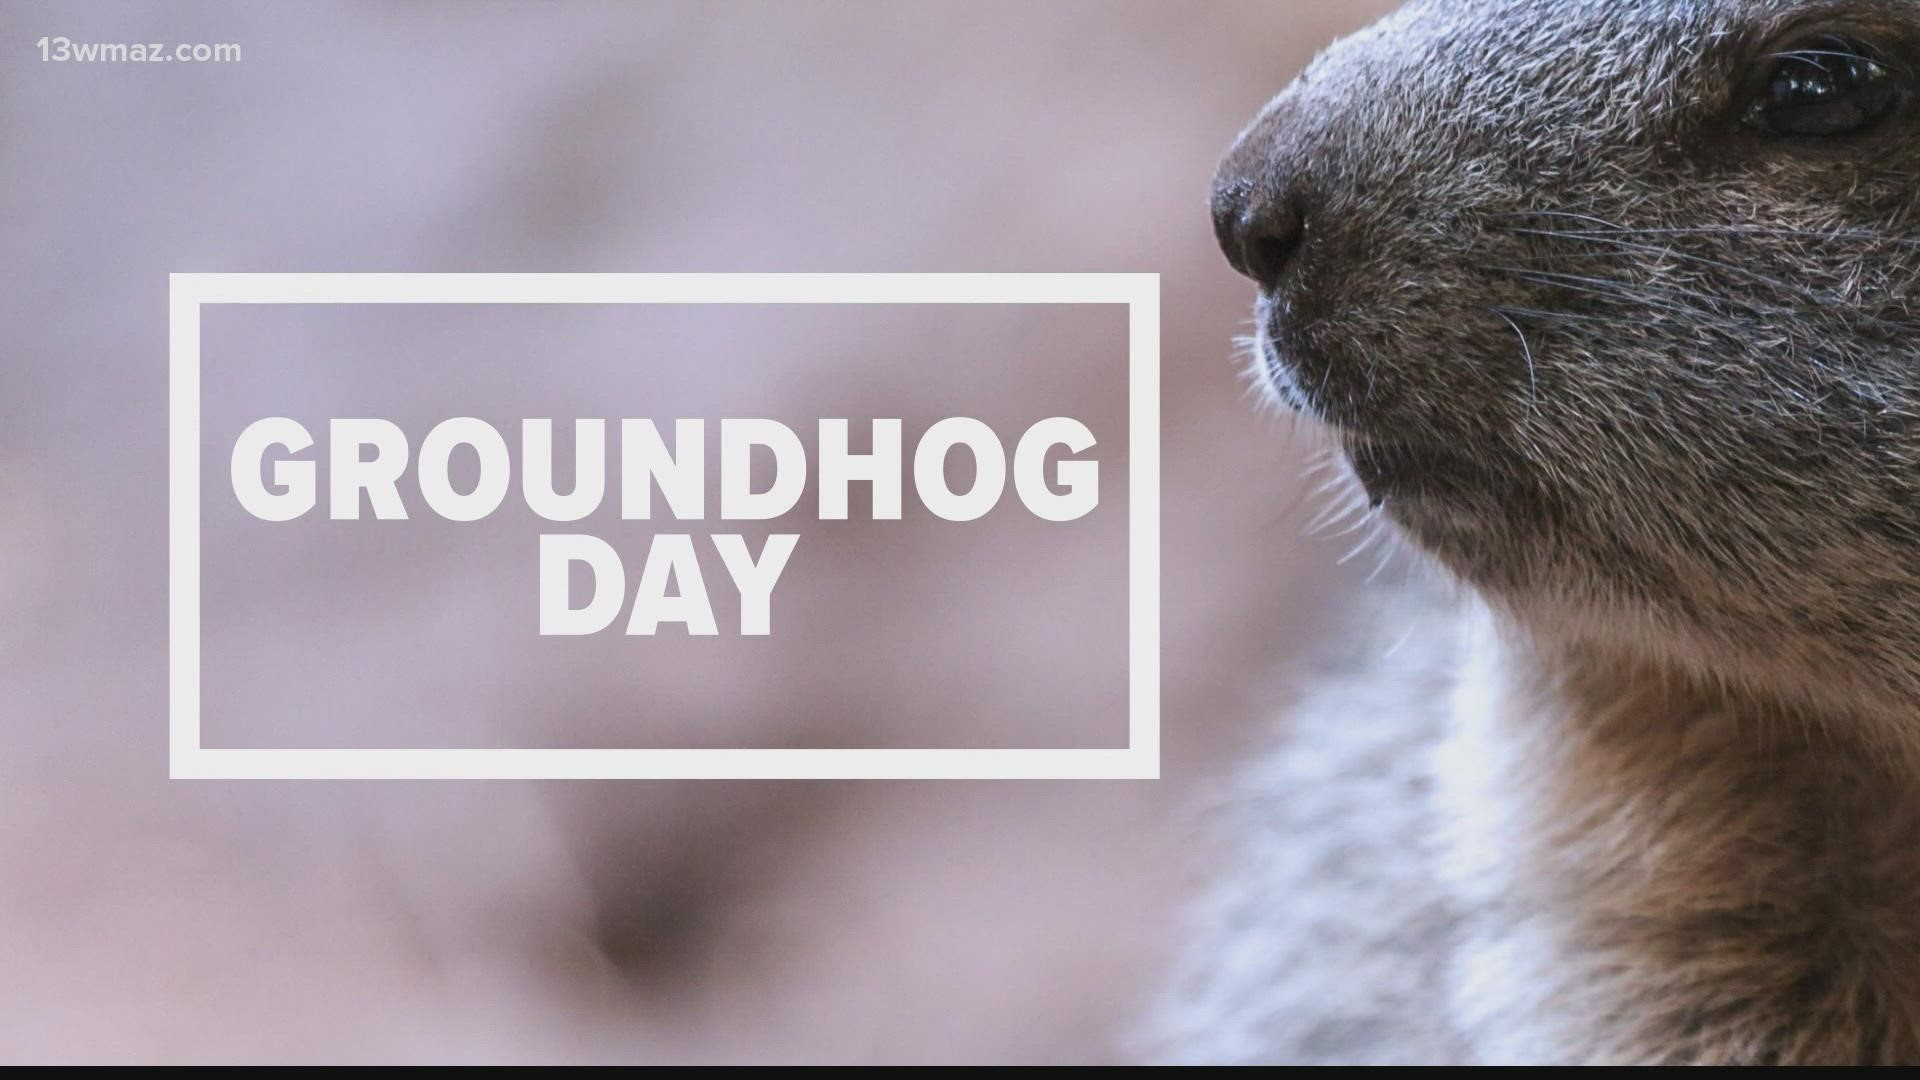 Groundhog Day gives those animals the authority to predict the weather. Meteorologist Taylor Stephenson breaks down the history and meaning behind this day.